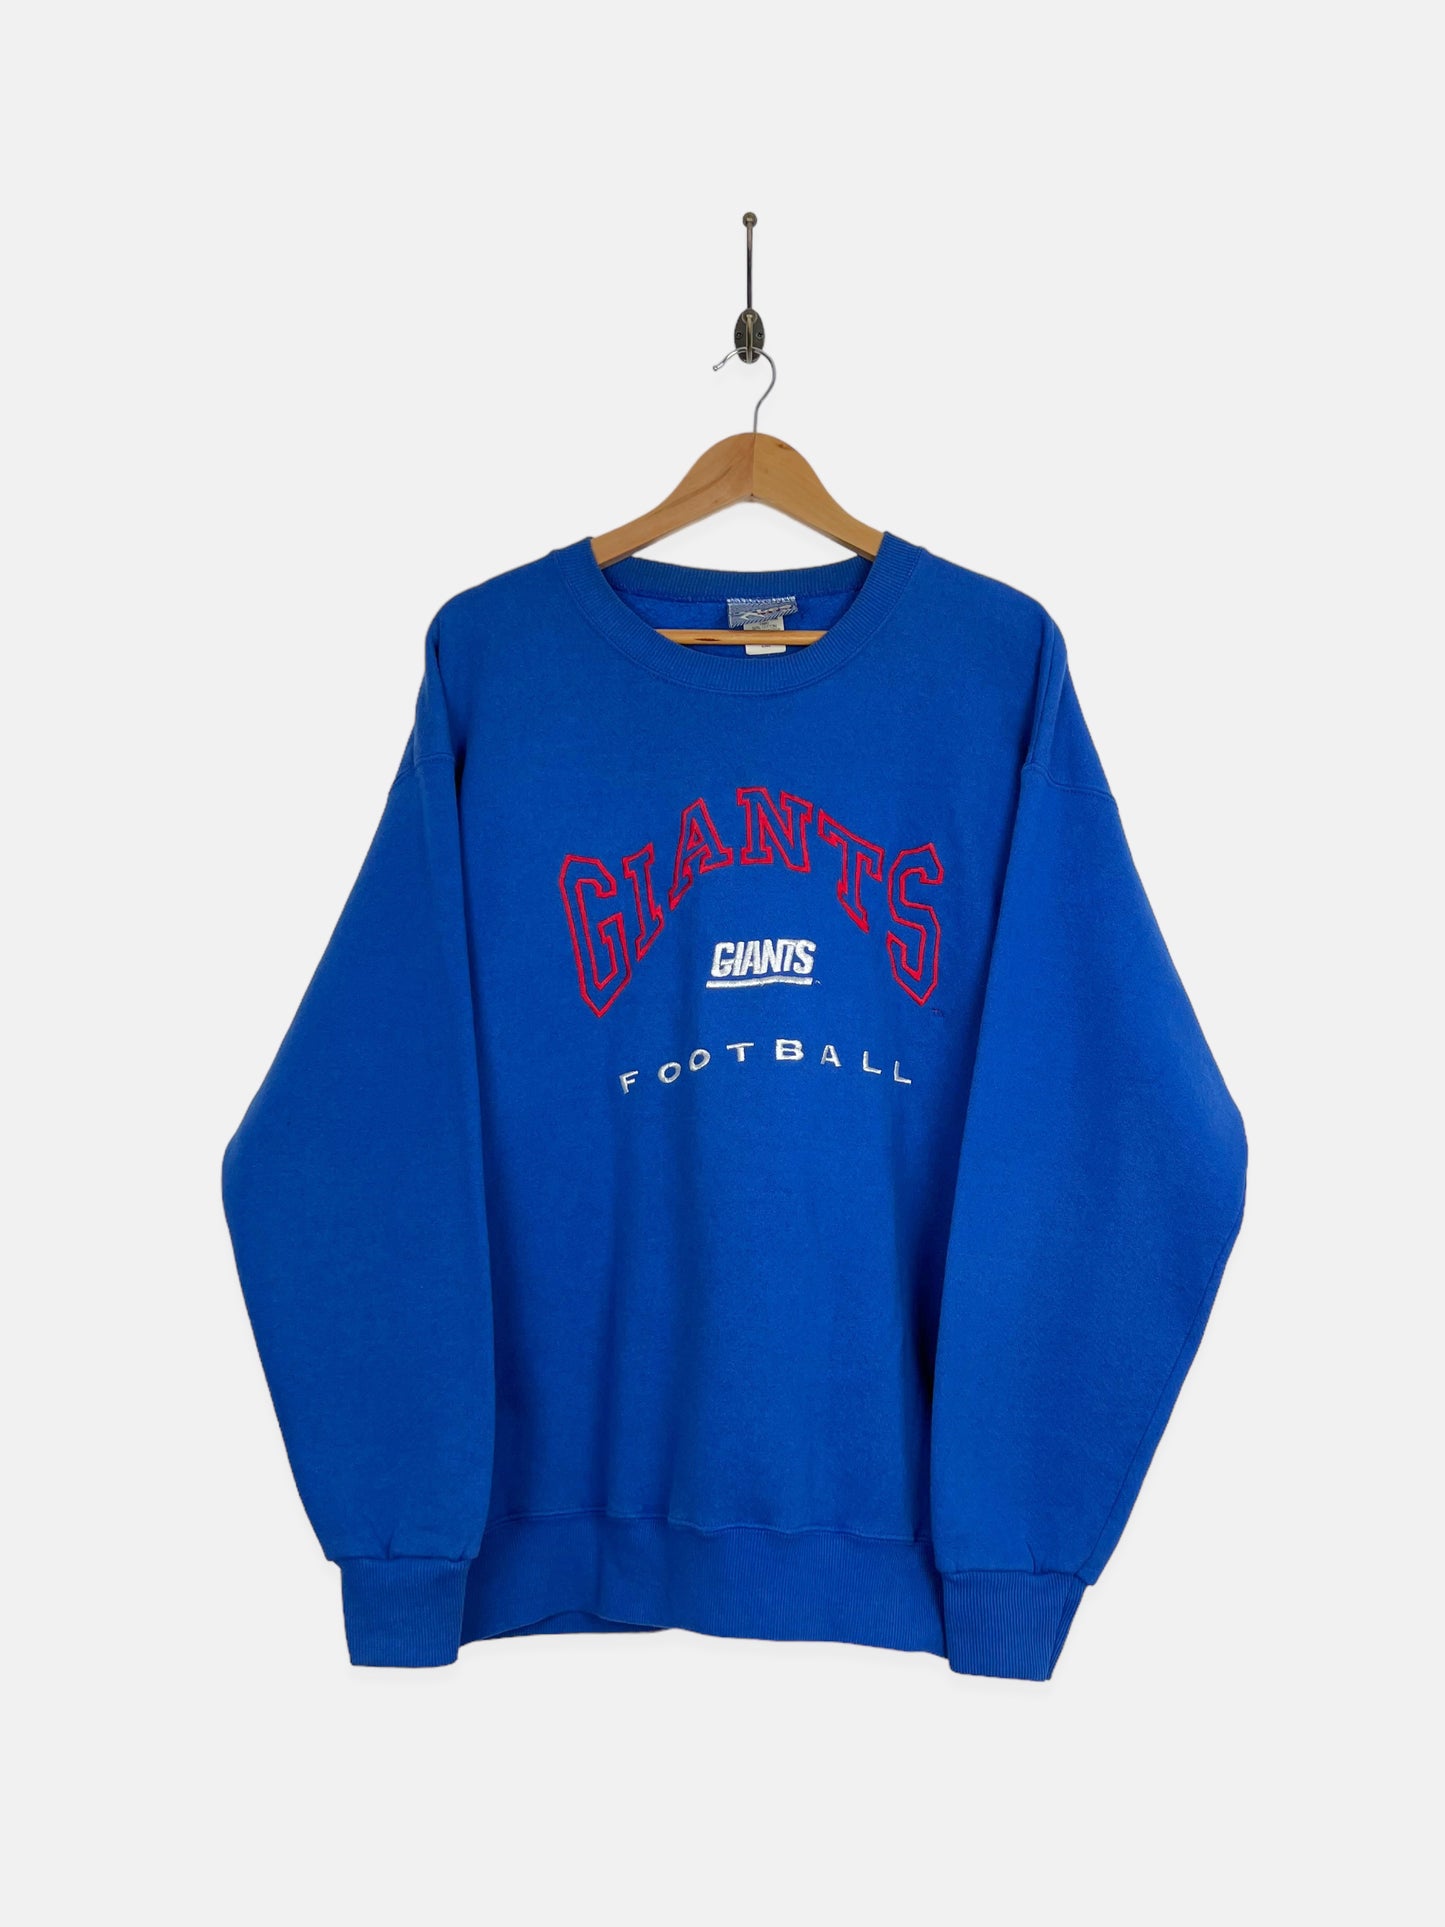 90's New York Giants NFL USA Made Embroidered Vintage Sweatshirt Size L-XL